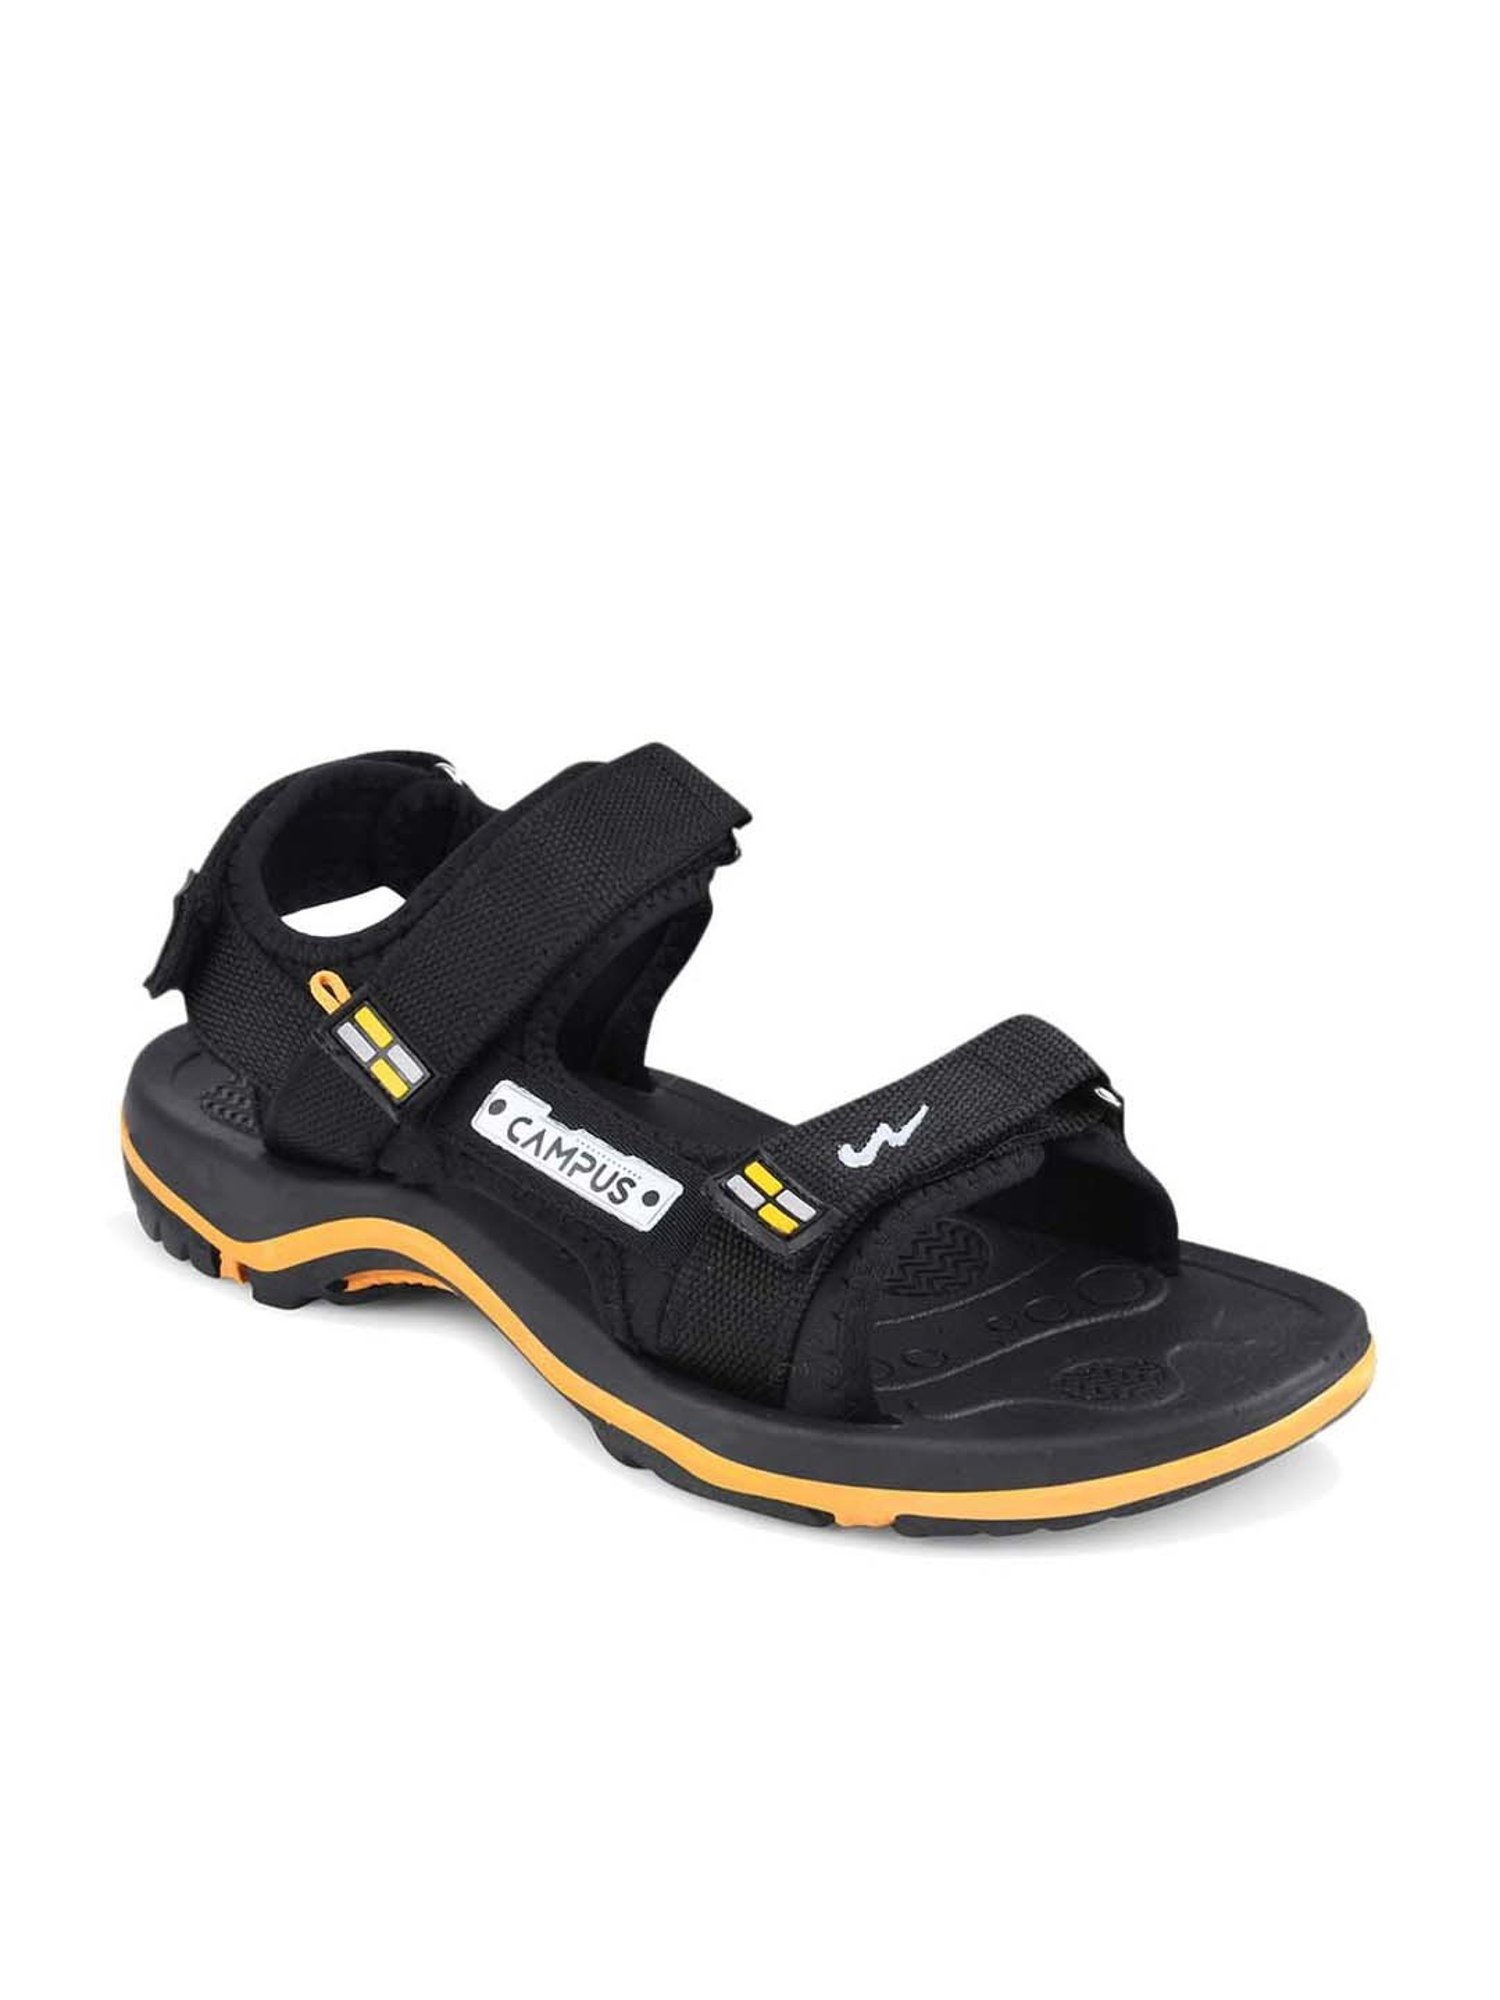 CAMPUS Skore Sandals in Sonbhadra at best price by Lokesh Shoes Center -  Justdial